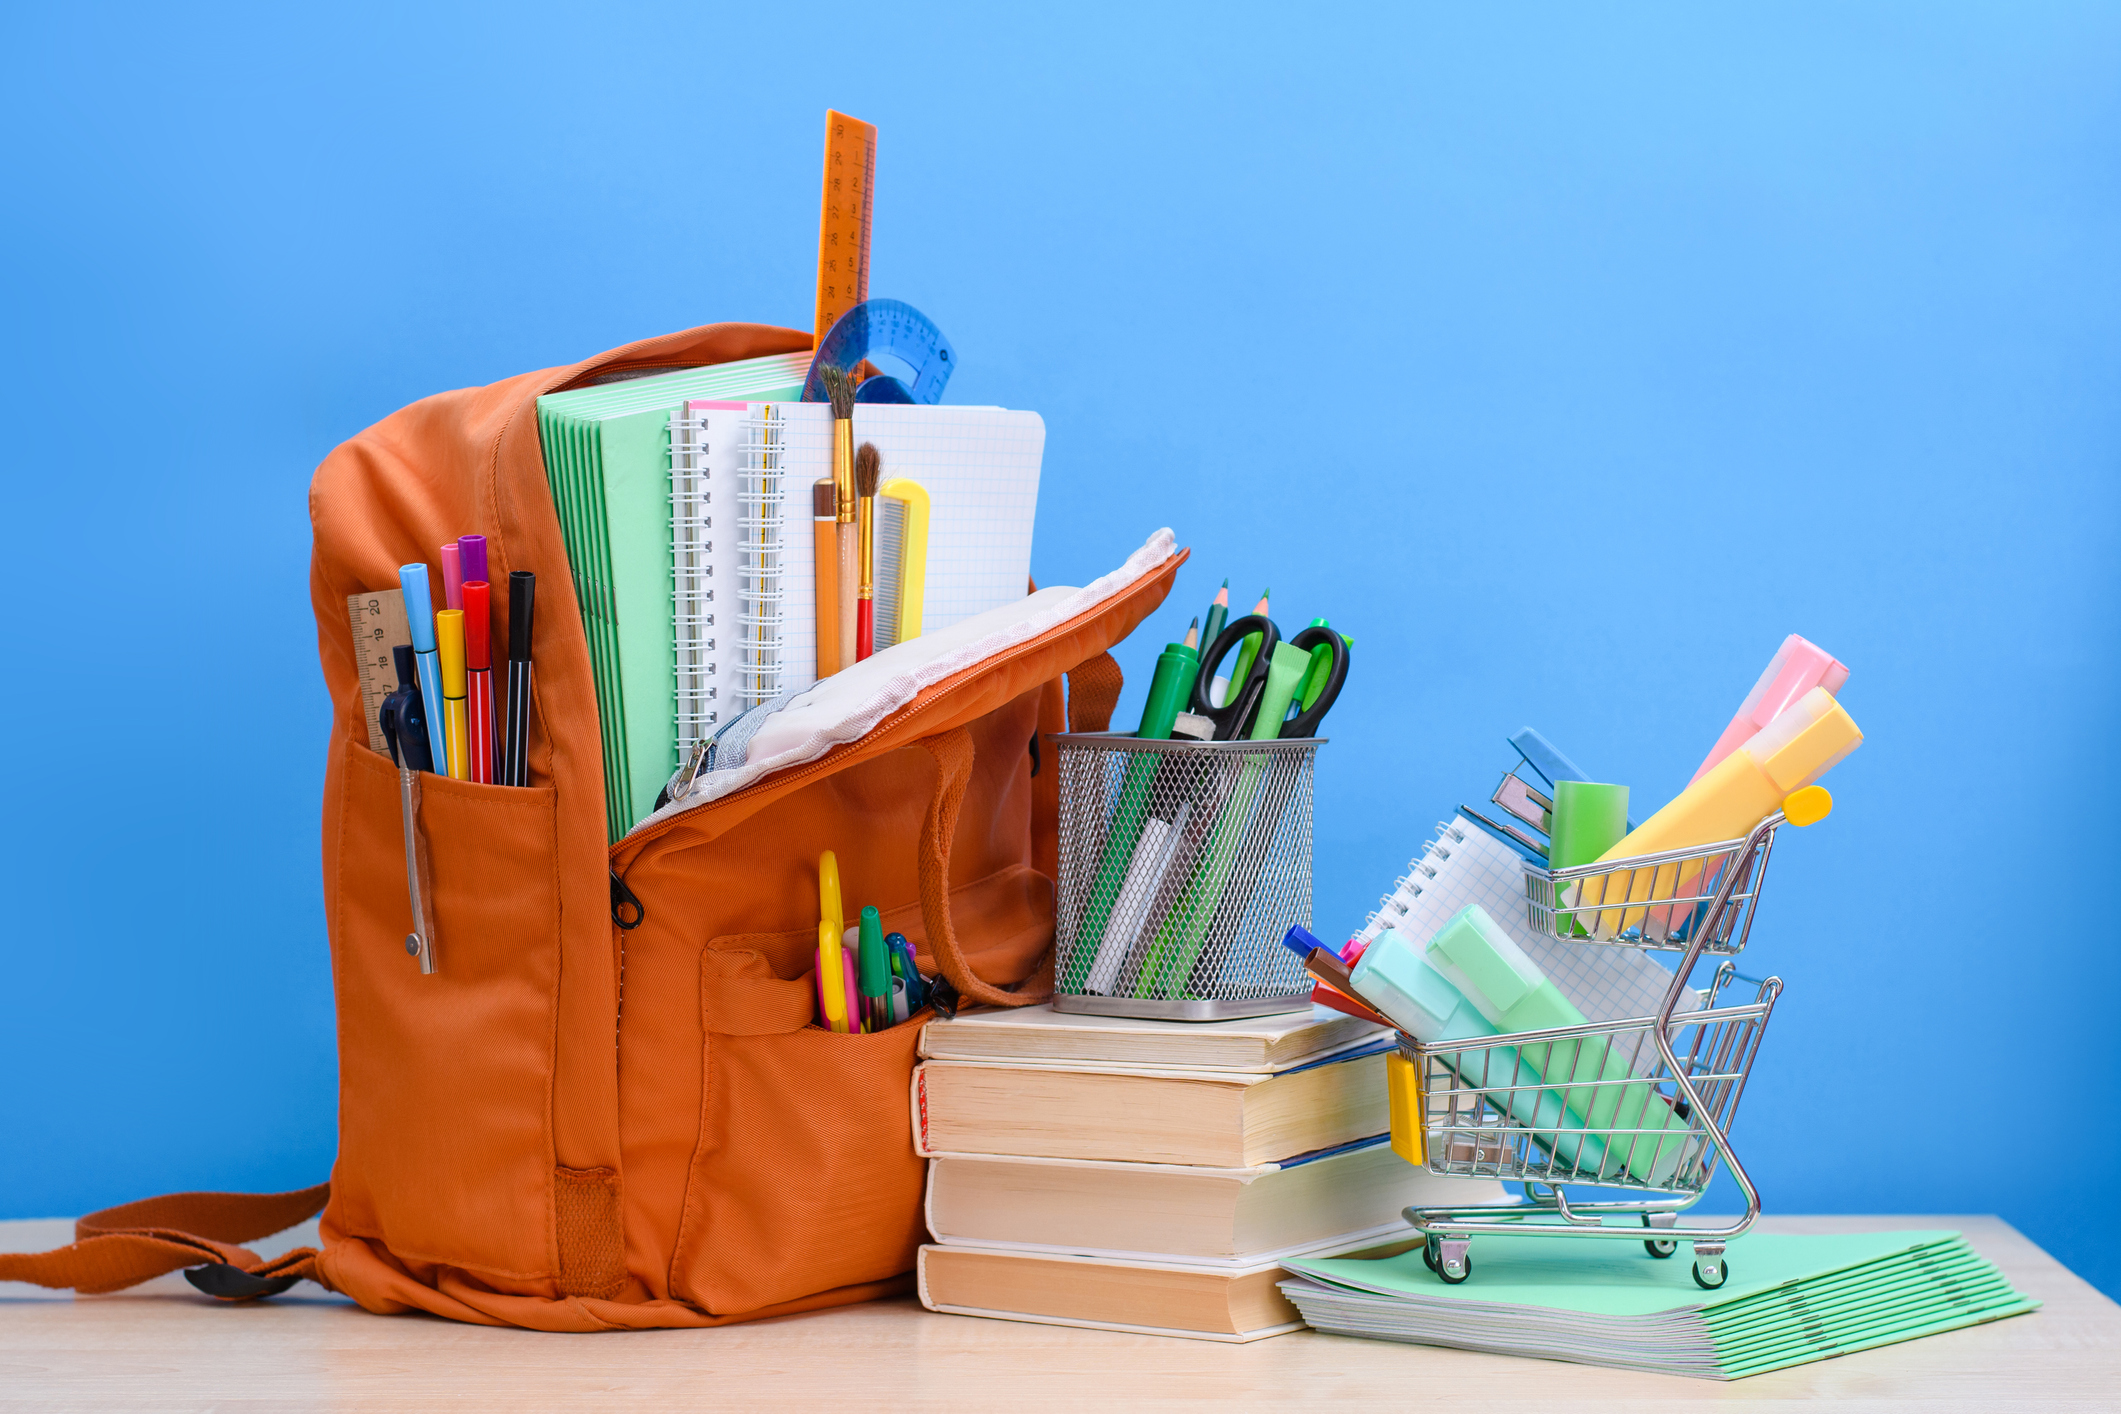 Orange school backpack full of school supplies and a supermarket basket with office supplies on a blue background.